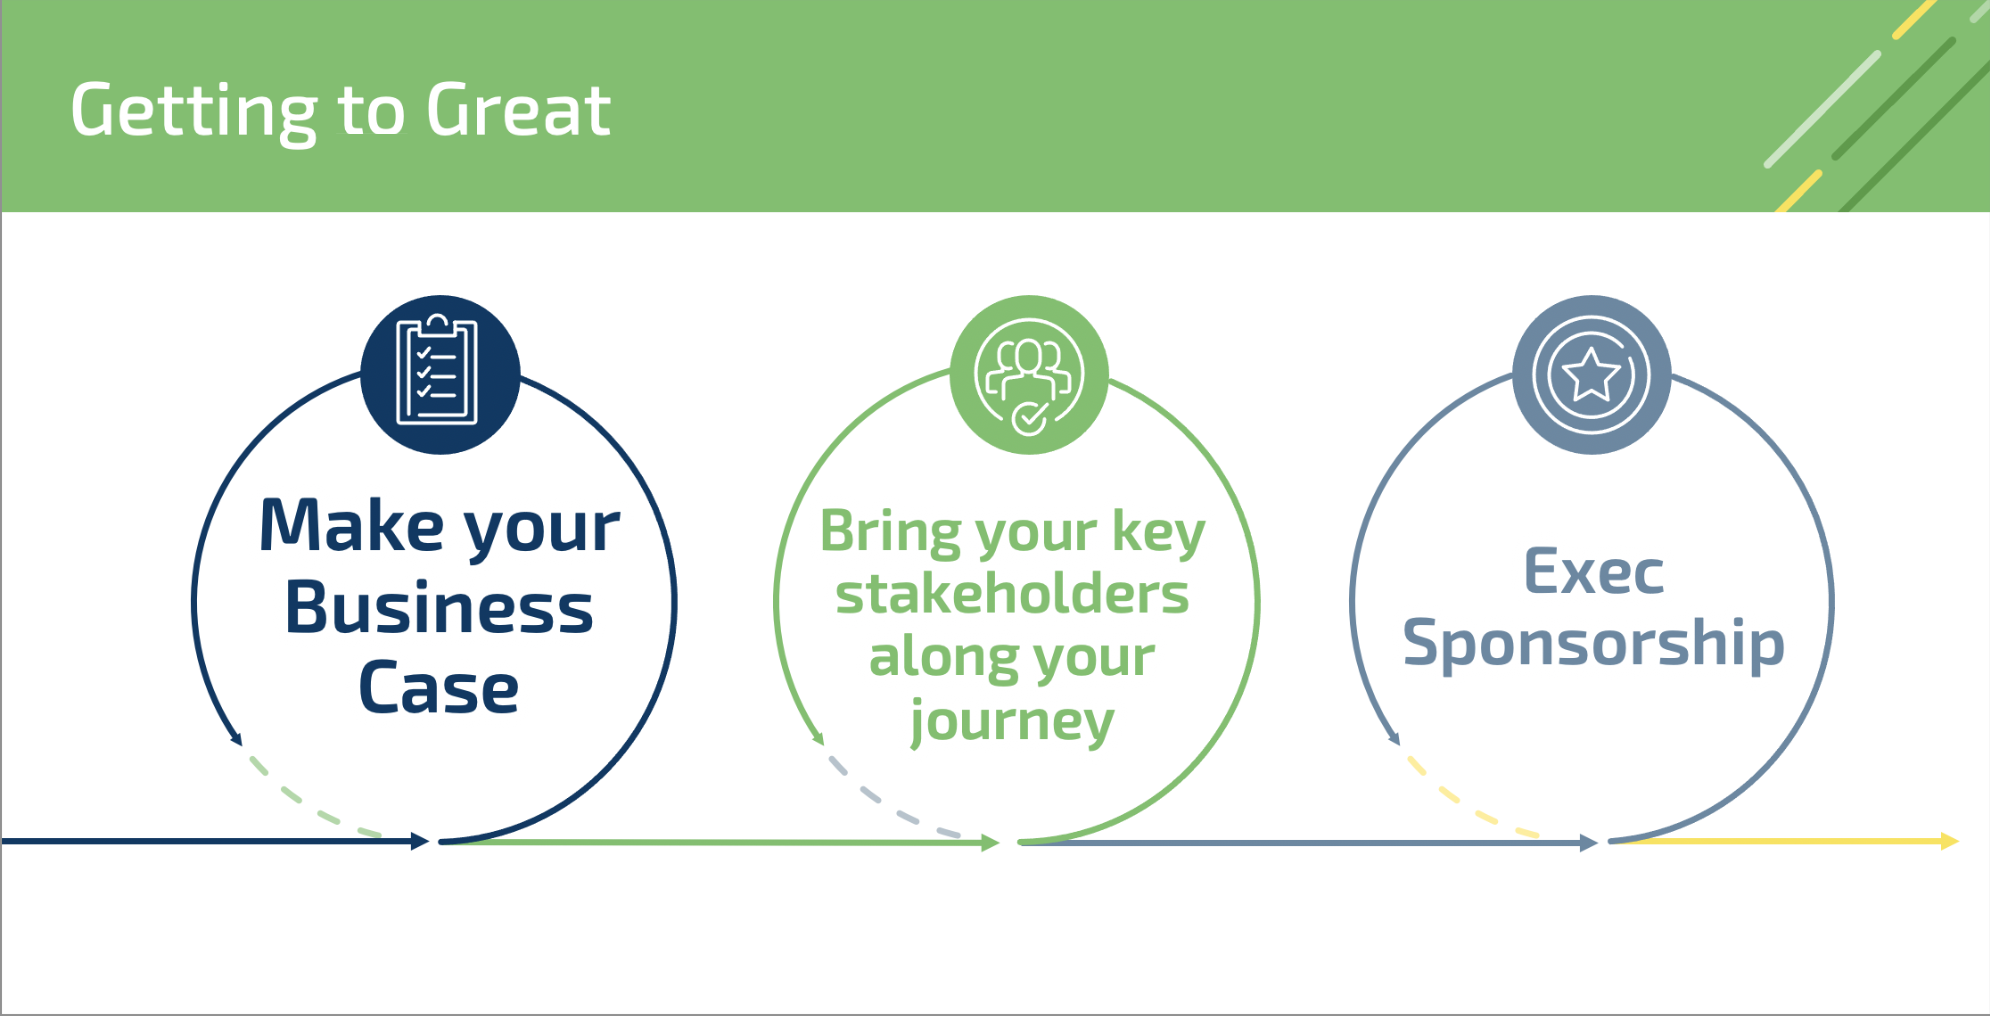 Getting to Great: Make Your Business Case, Bring your key stakeholders along your journey, exec sponsorship